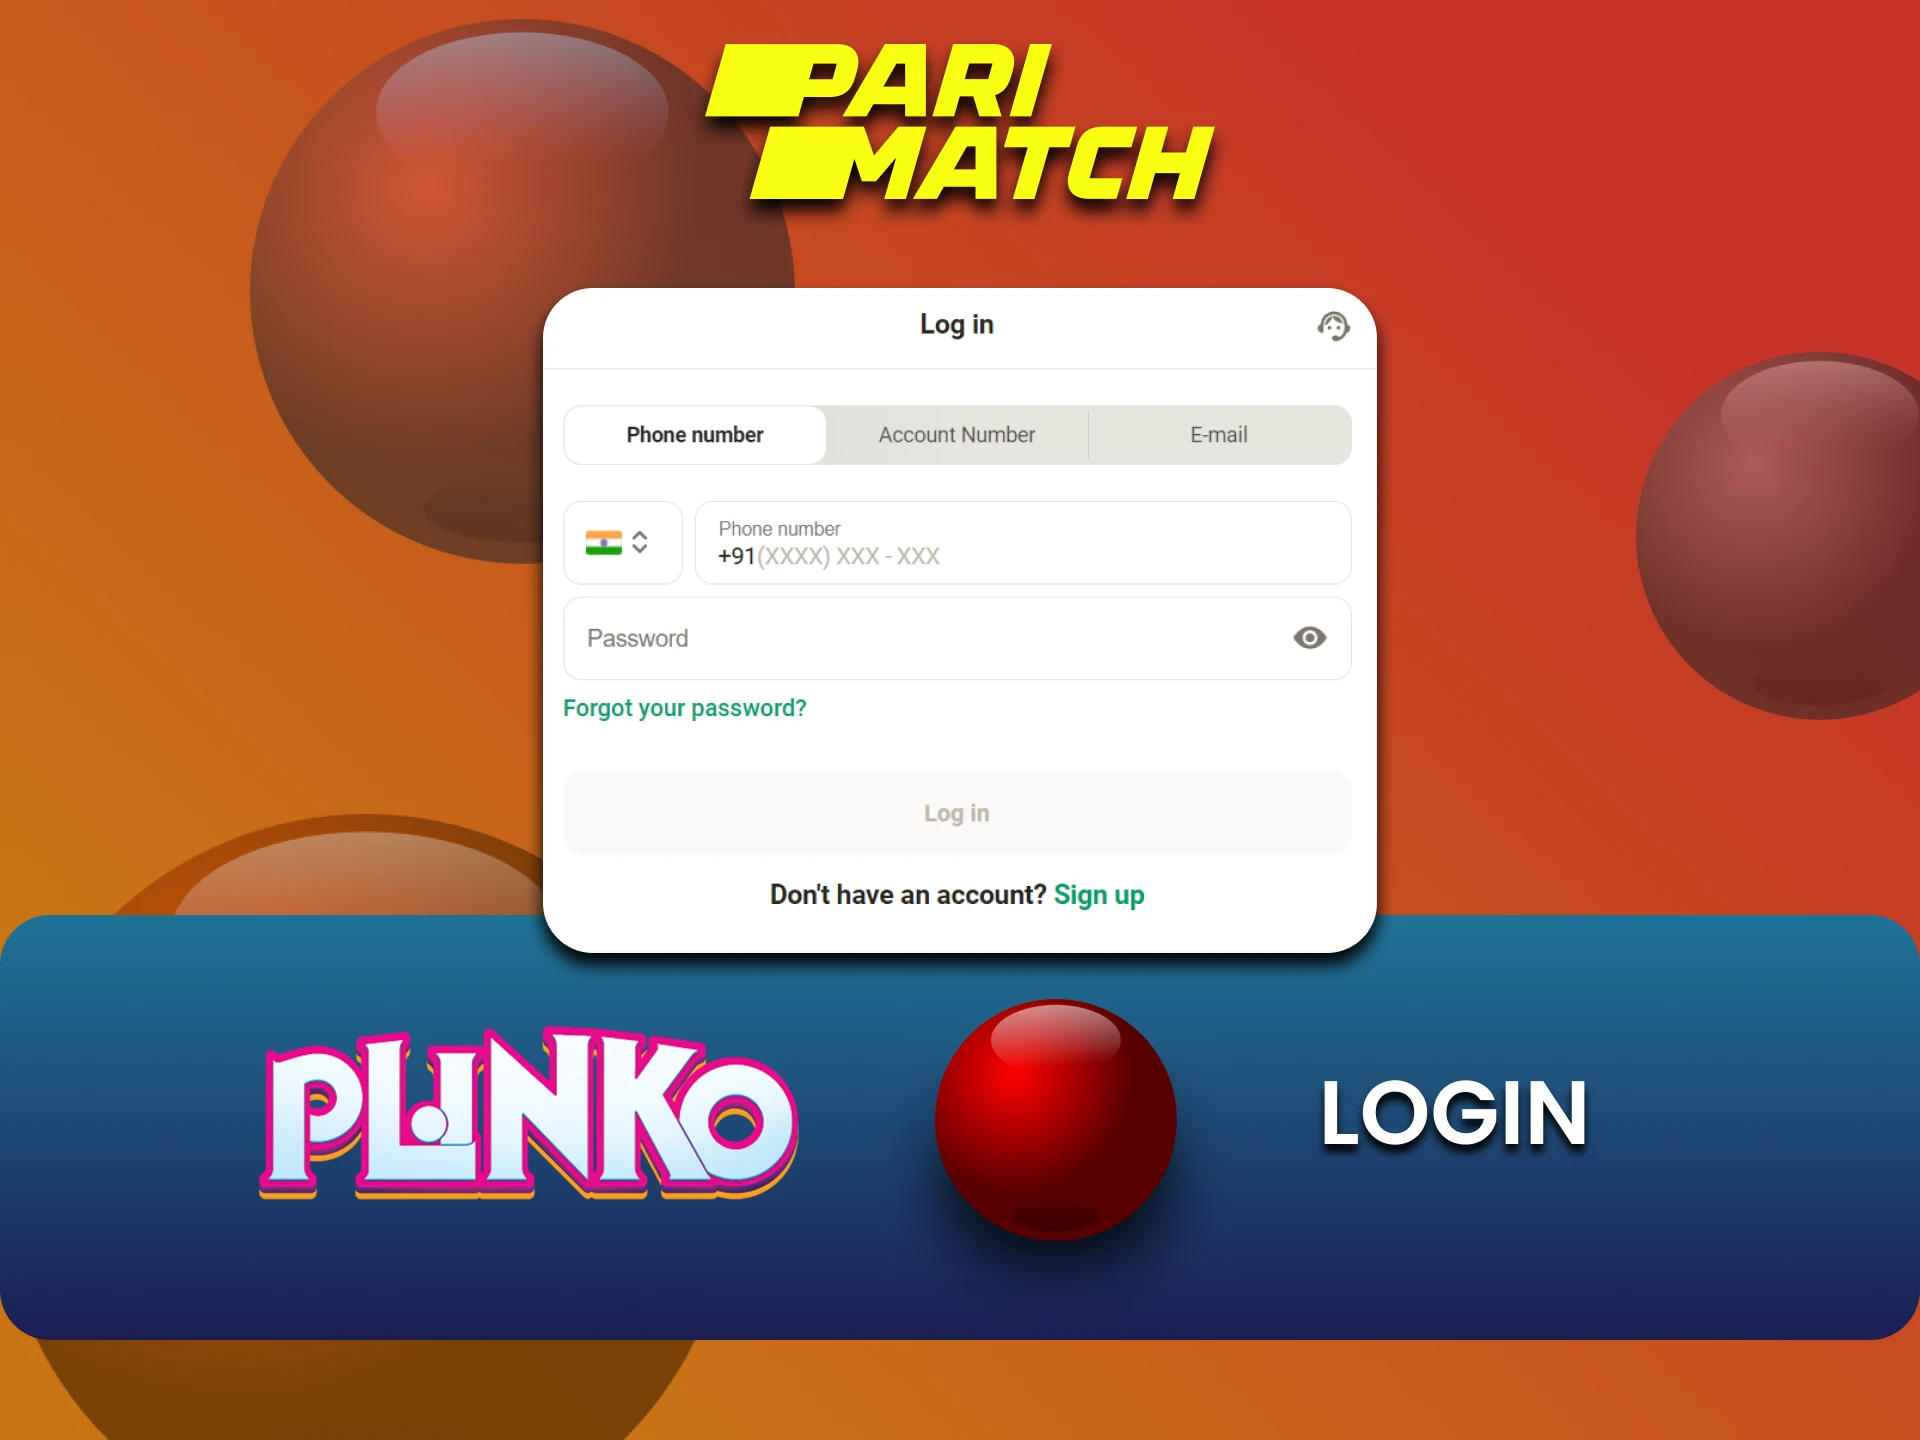 Log in to your Parimatch account to play Plinko.